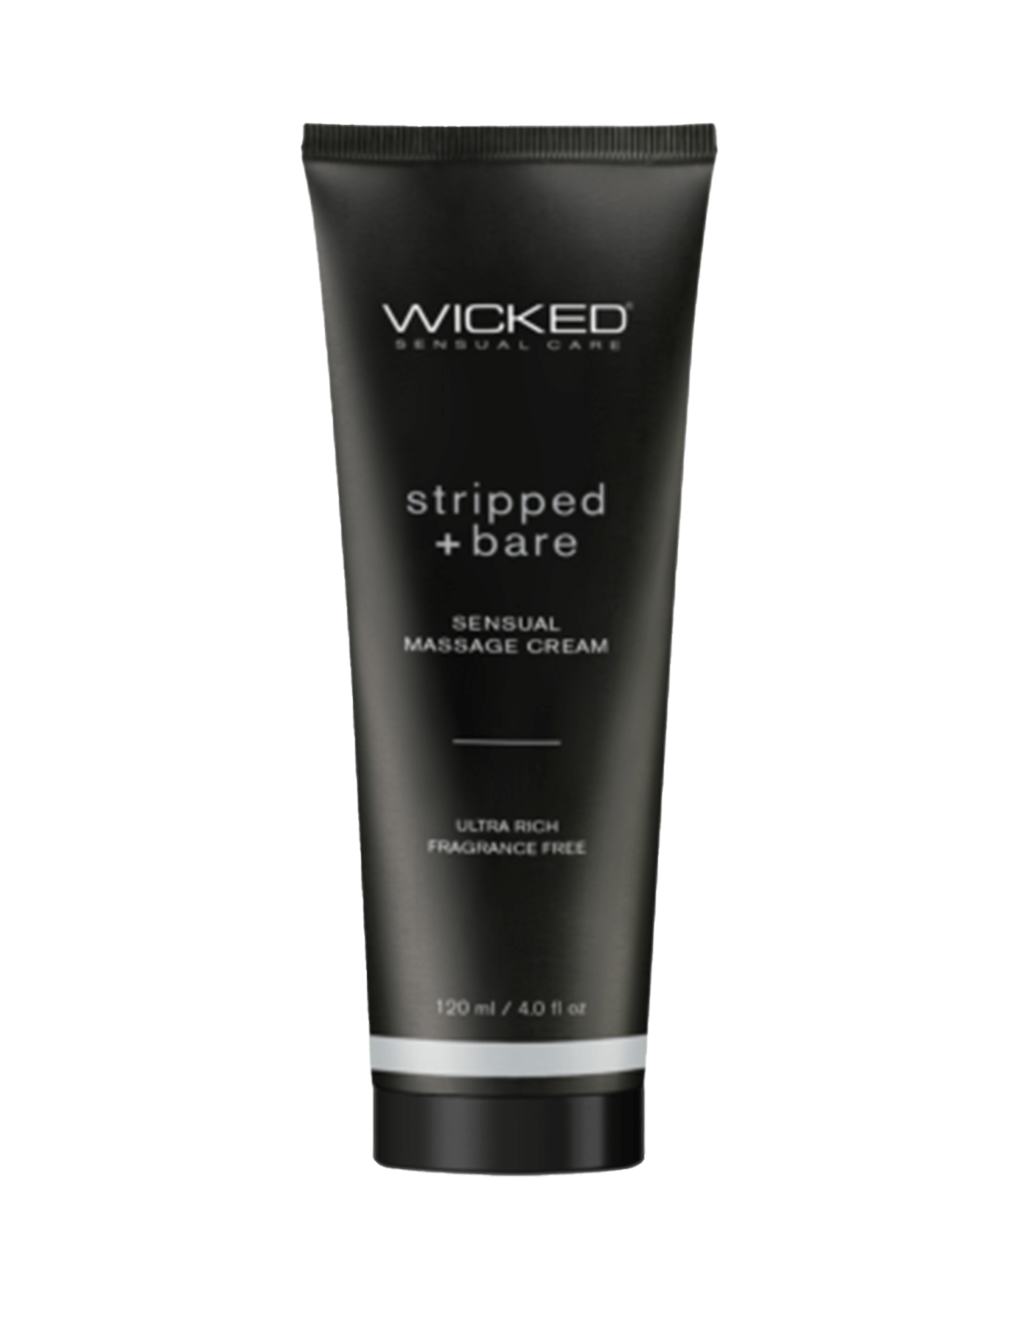 Wicked Stripped and Bare Massage Cream - Main